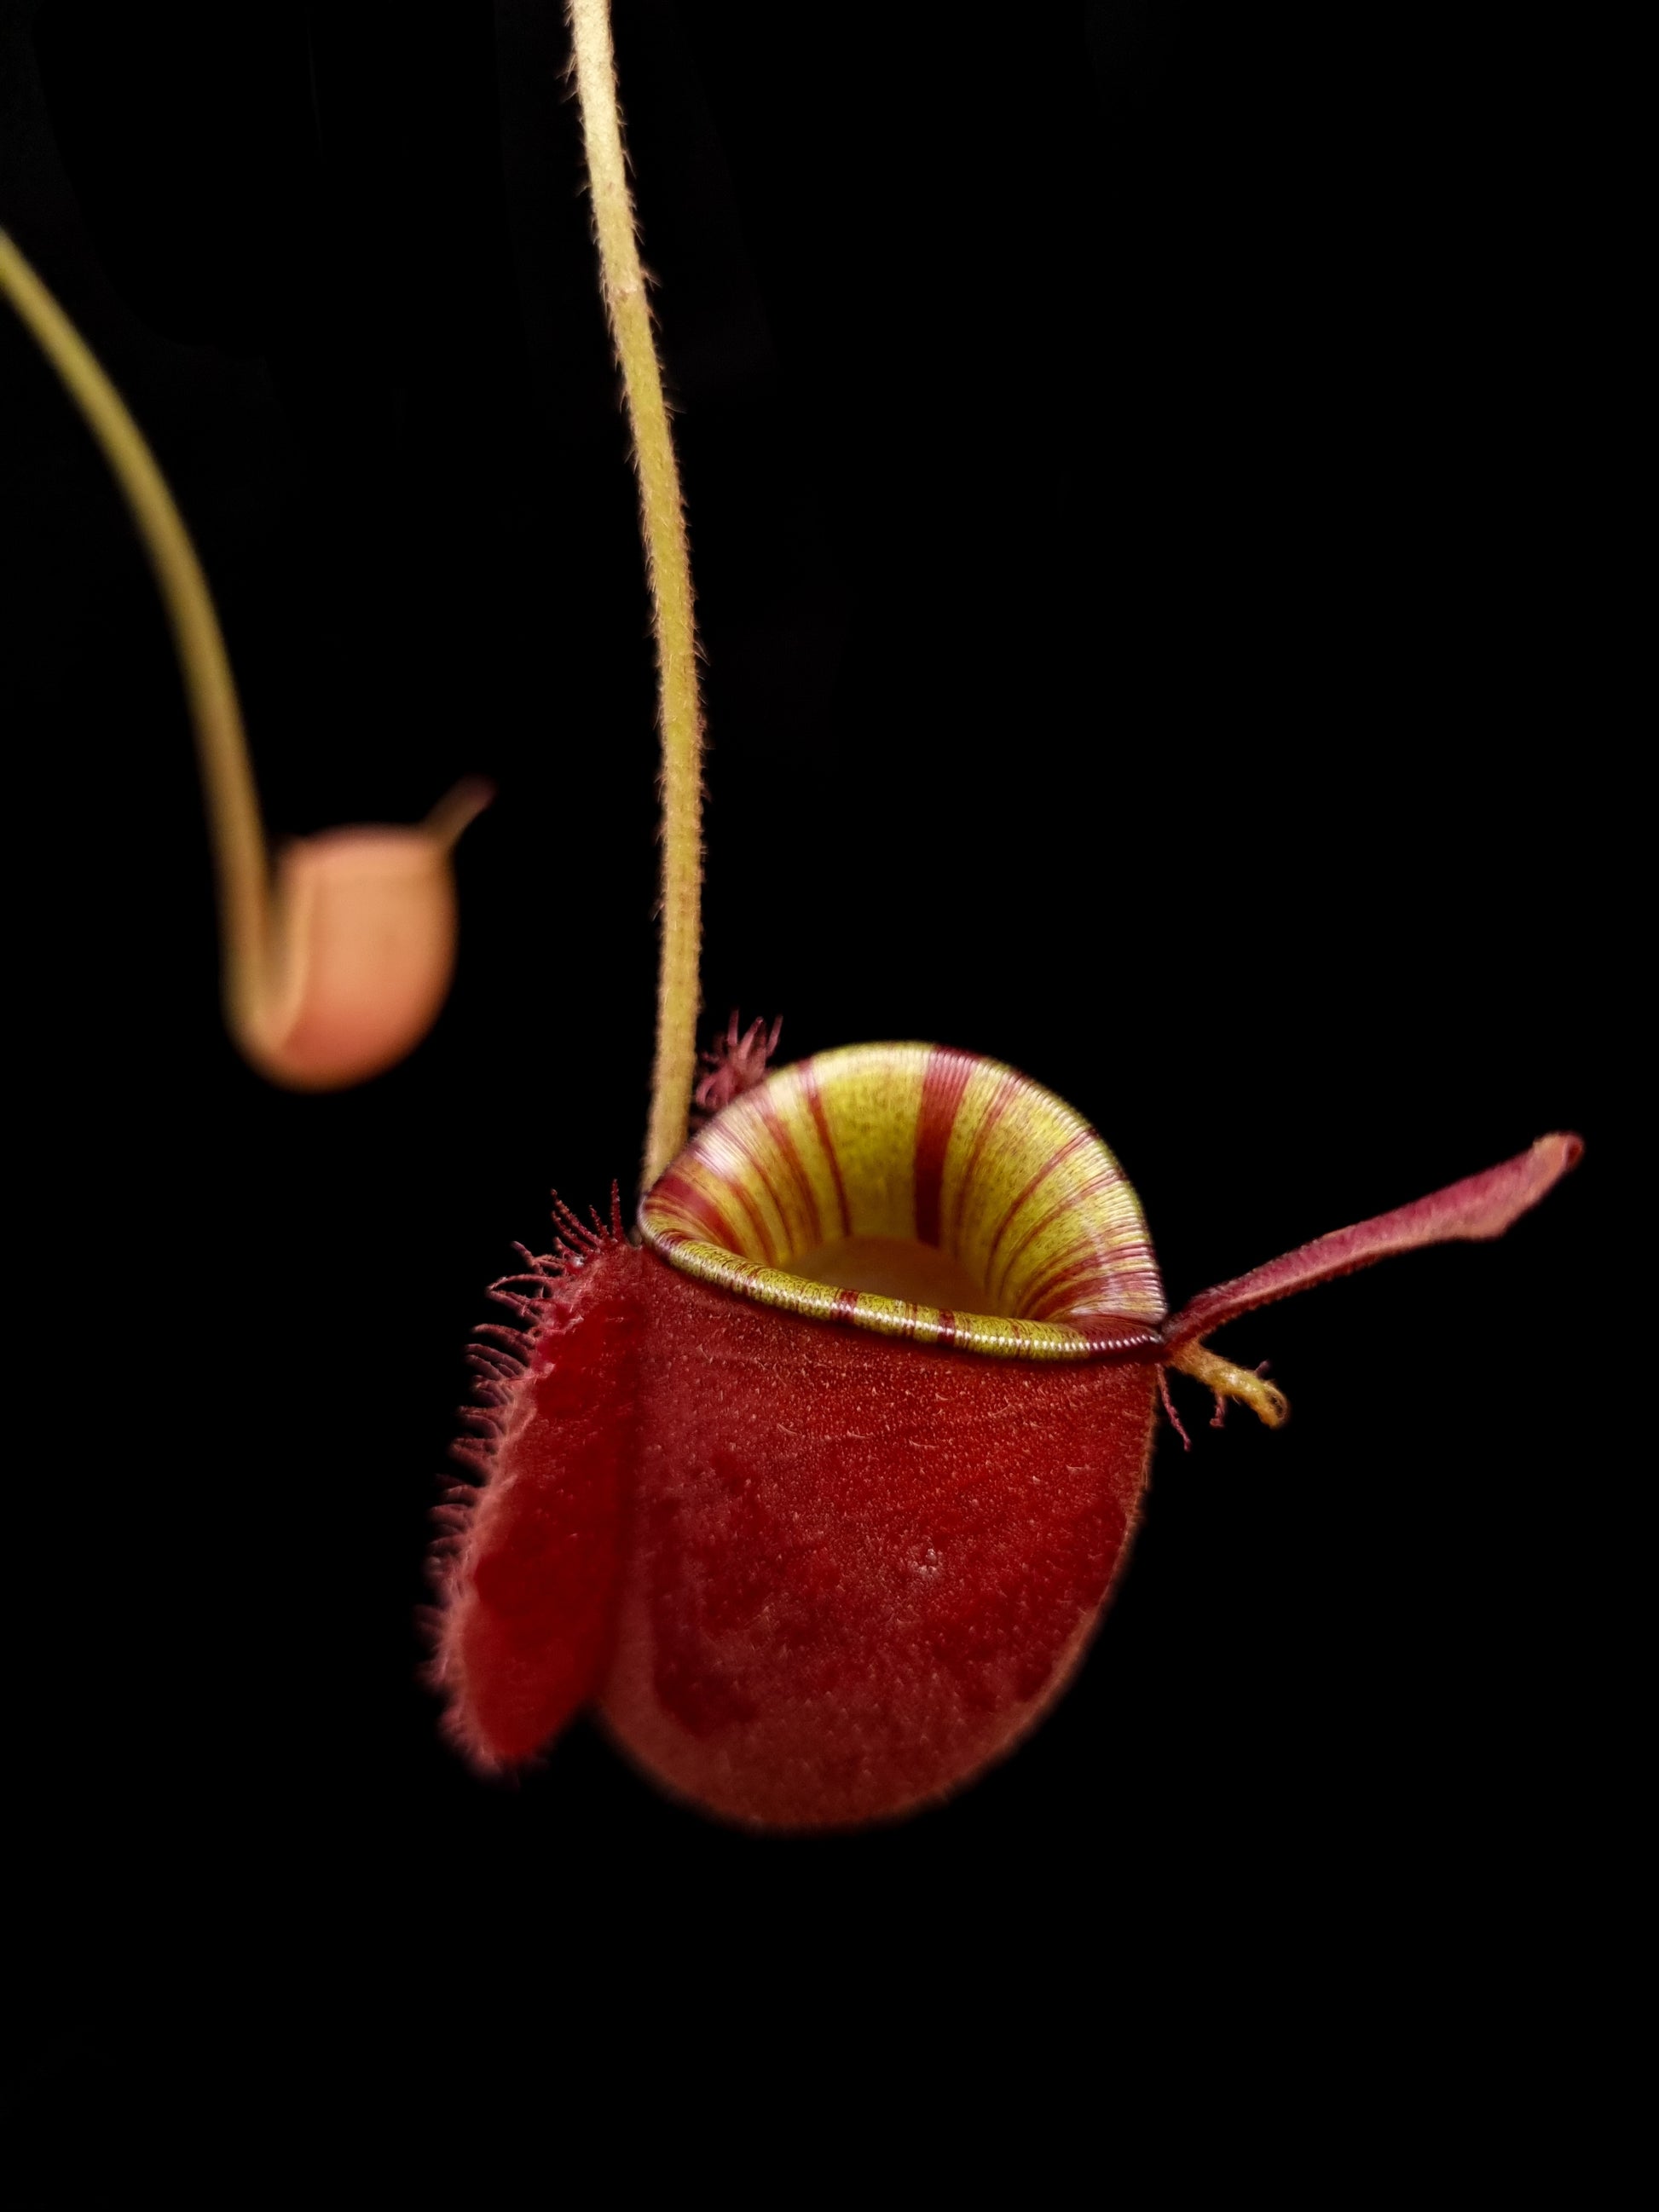 Nepenthes ampullaria pitcher plant carnivorous plants sale Singapore side view